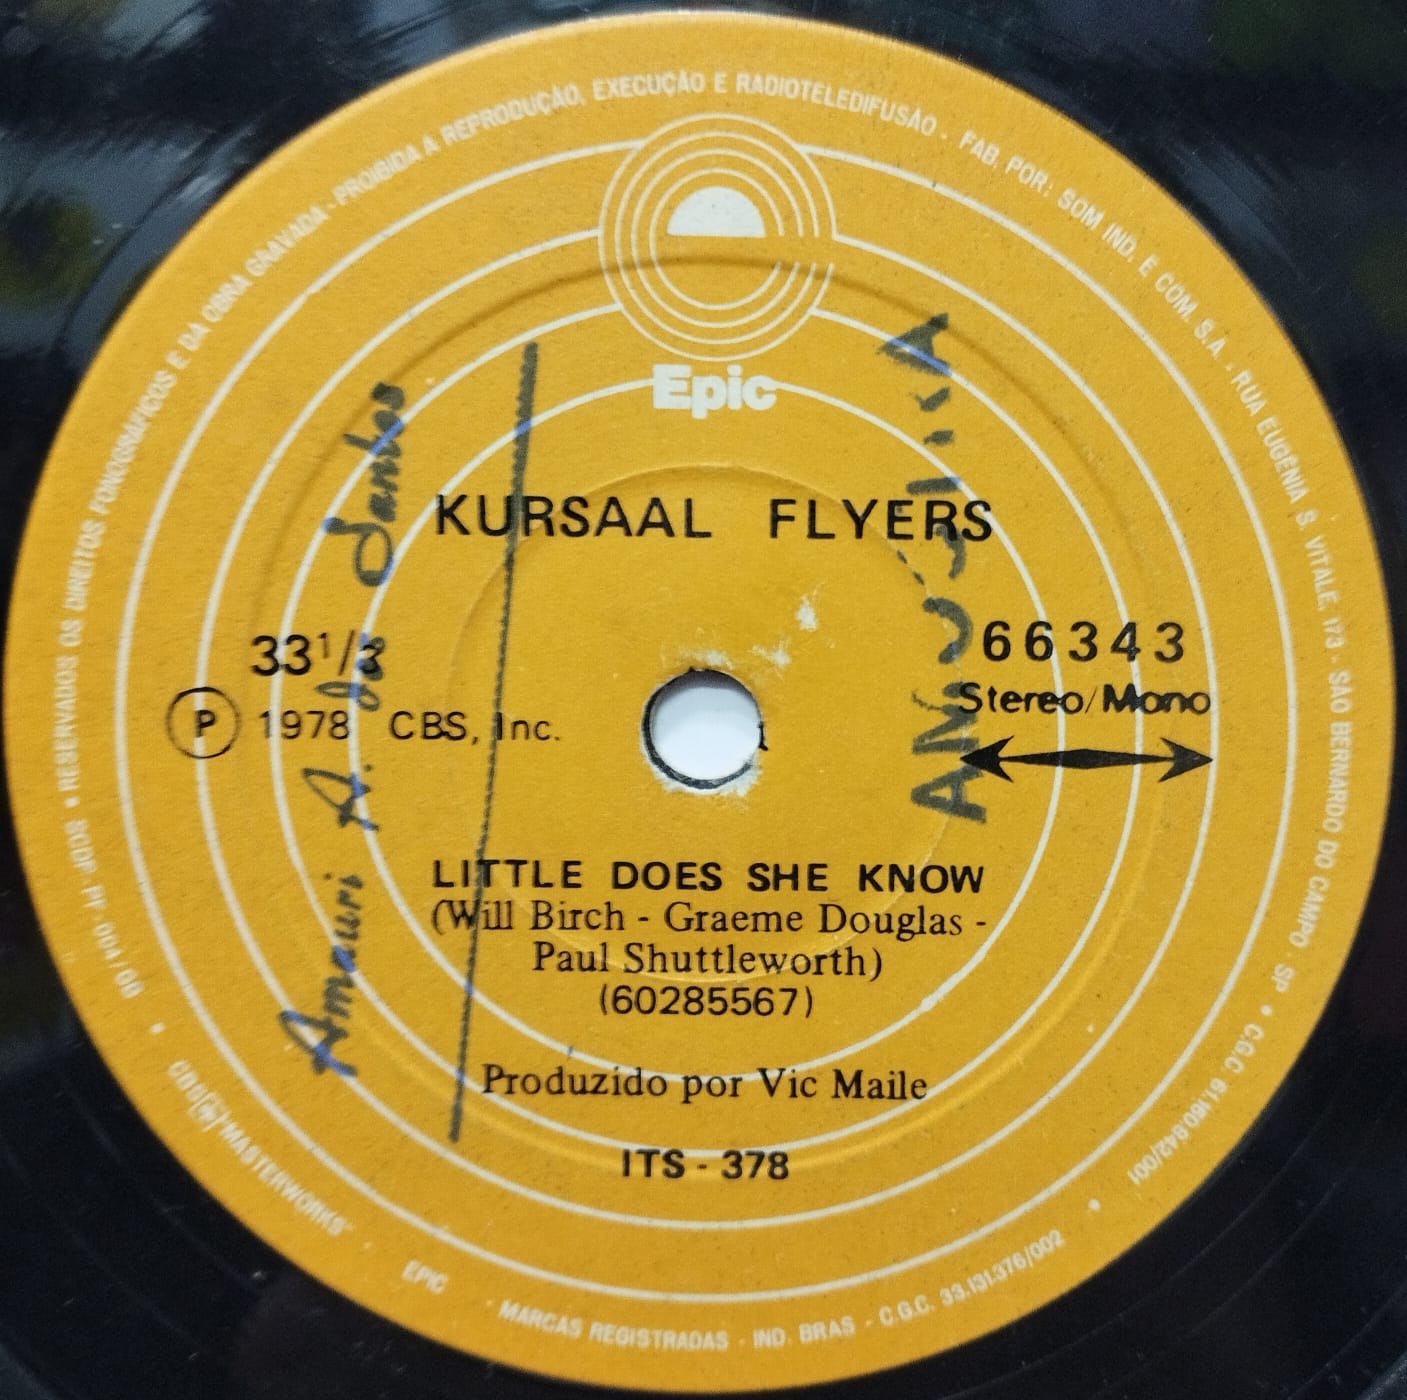 Kursaal Flyers ‎– The Sky's Falling In On Our Love (Compacto)